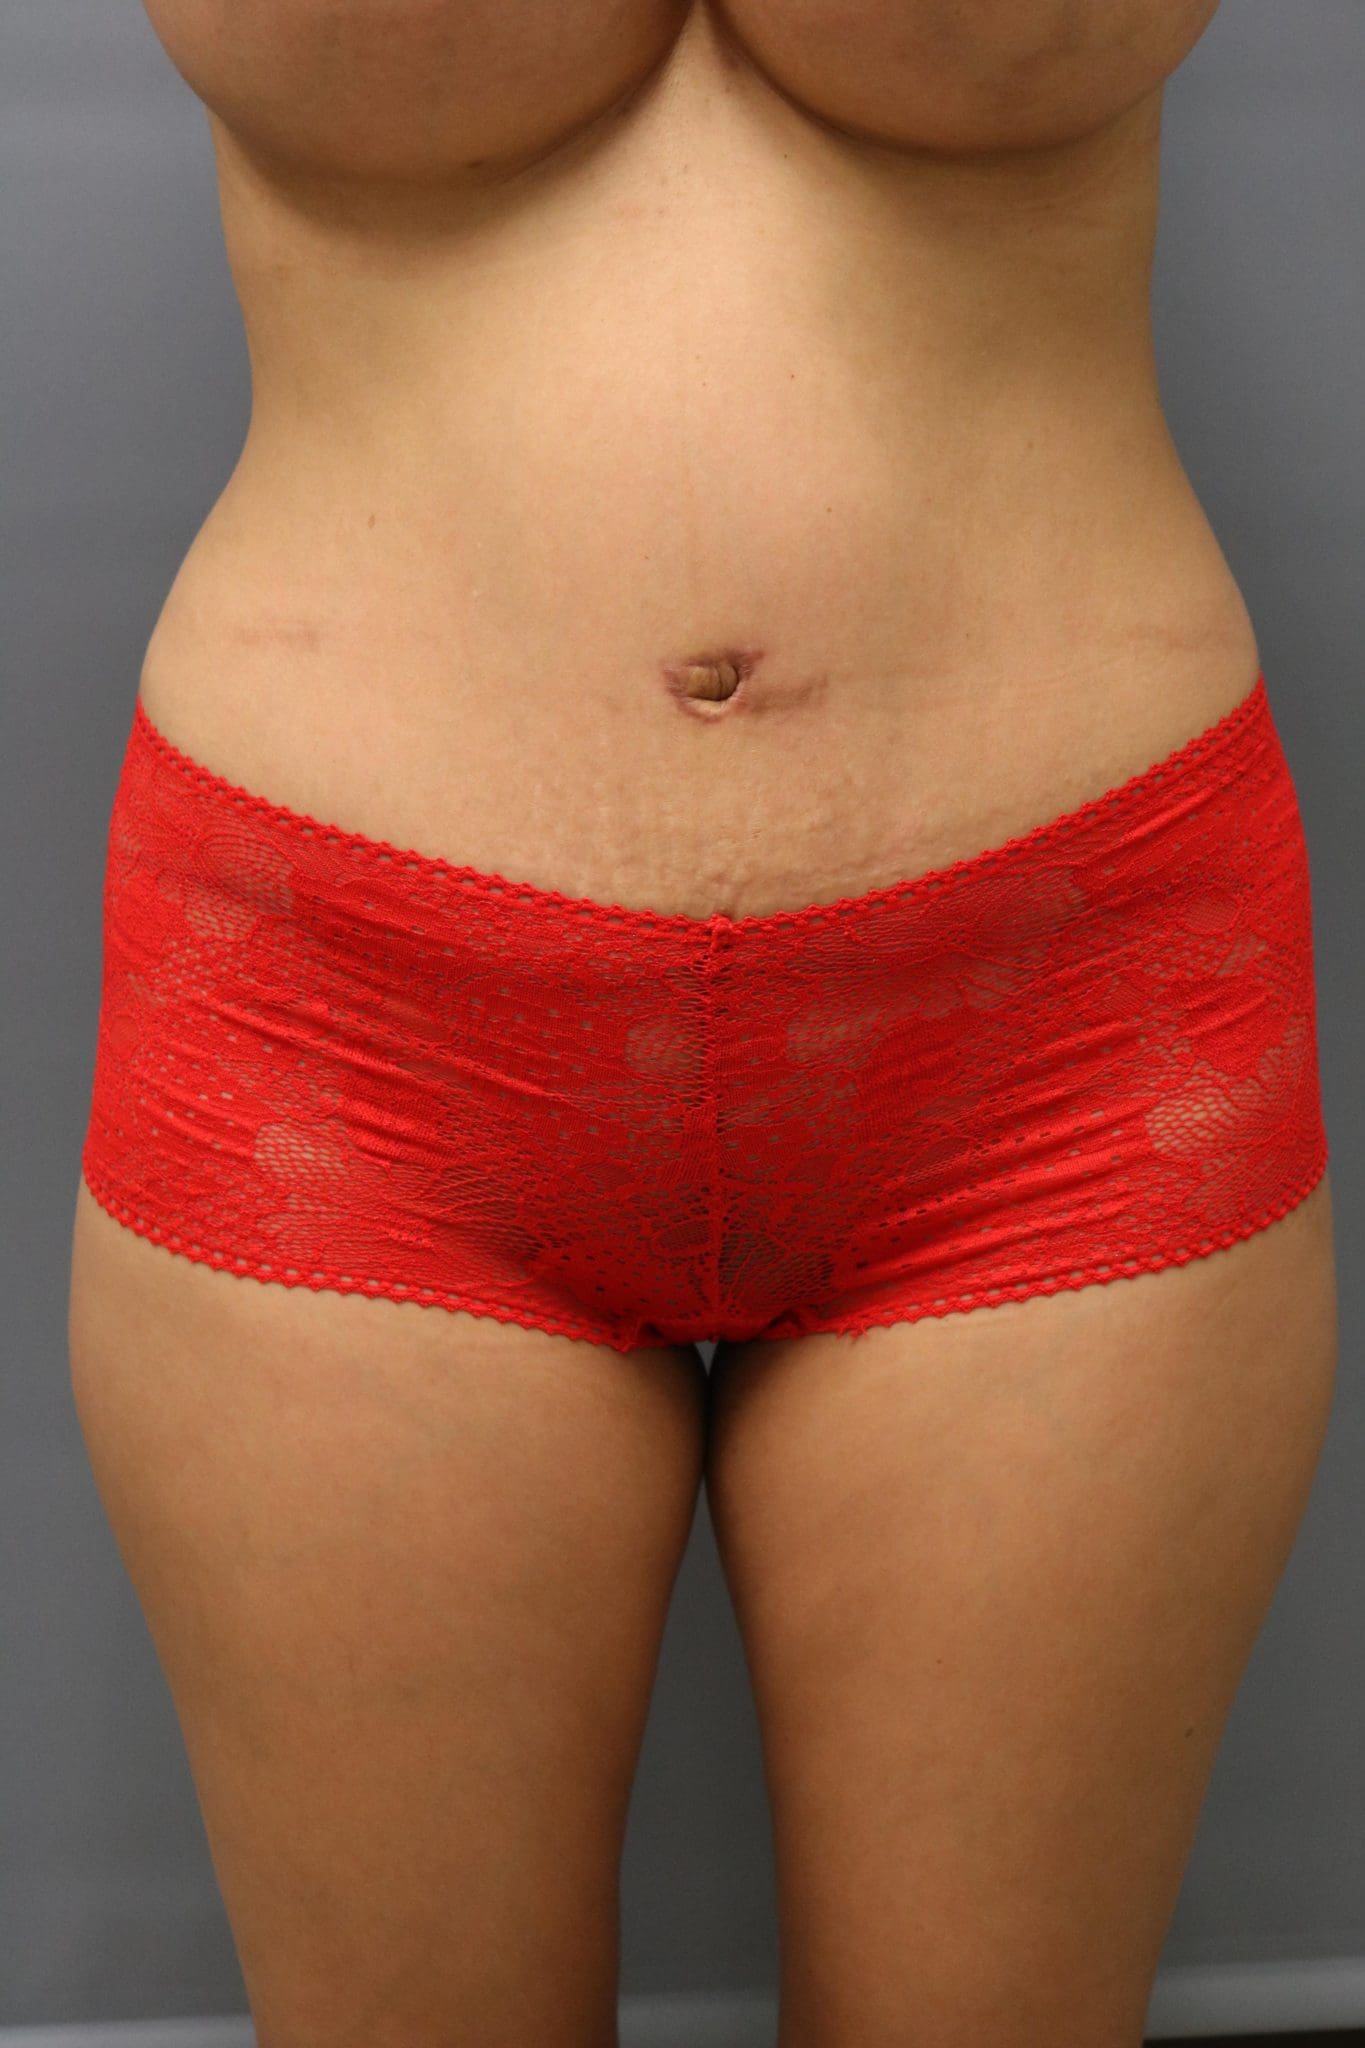 Tummy Tuck Patient Photo - Case 9250 - after view